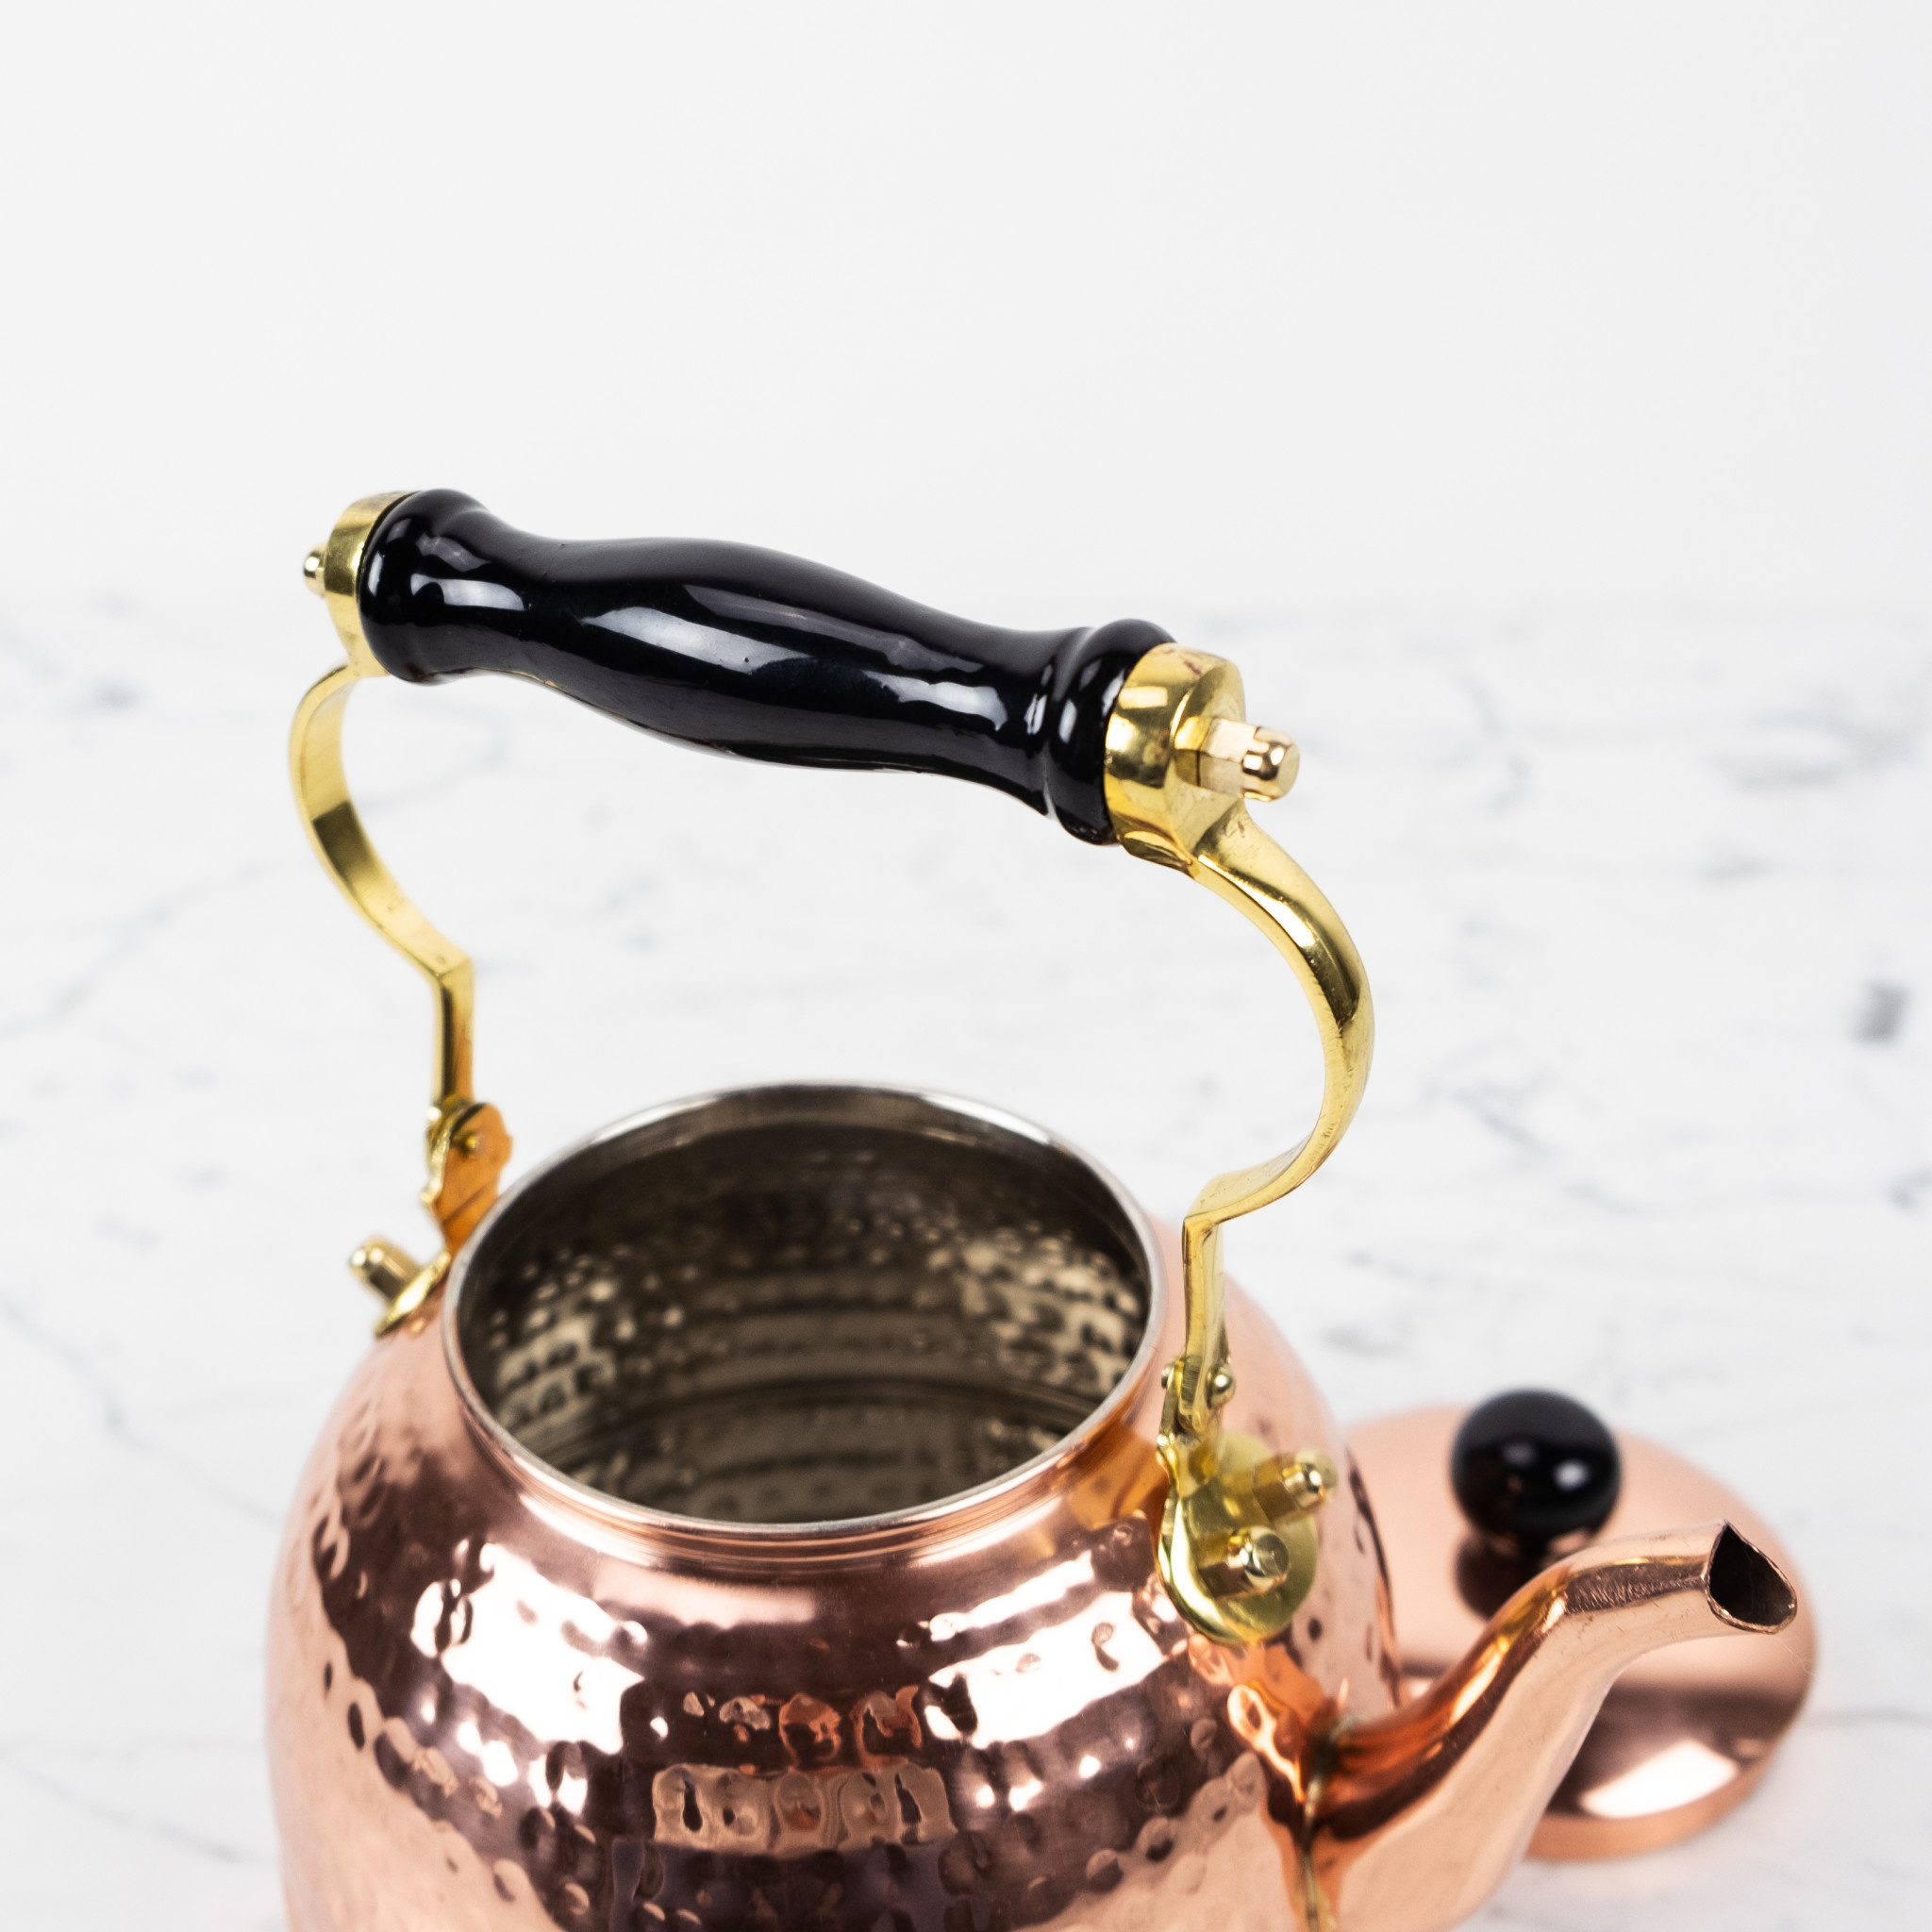 Hammered Copper Tea Kettle with Wood Handle